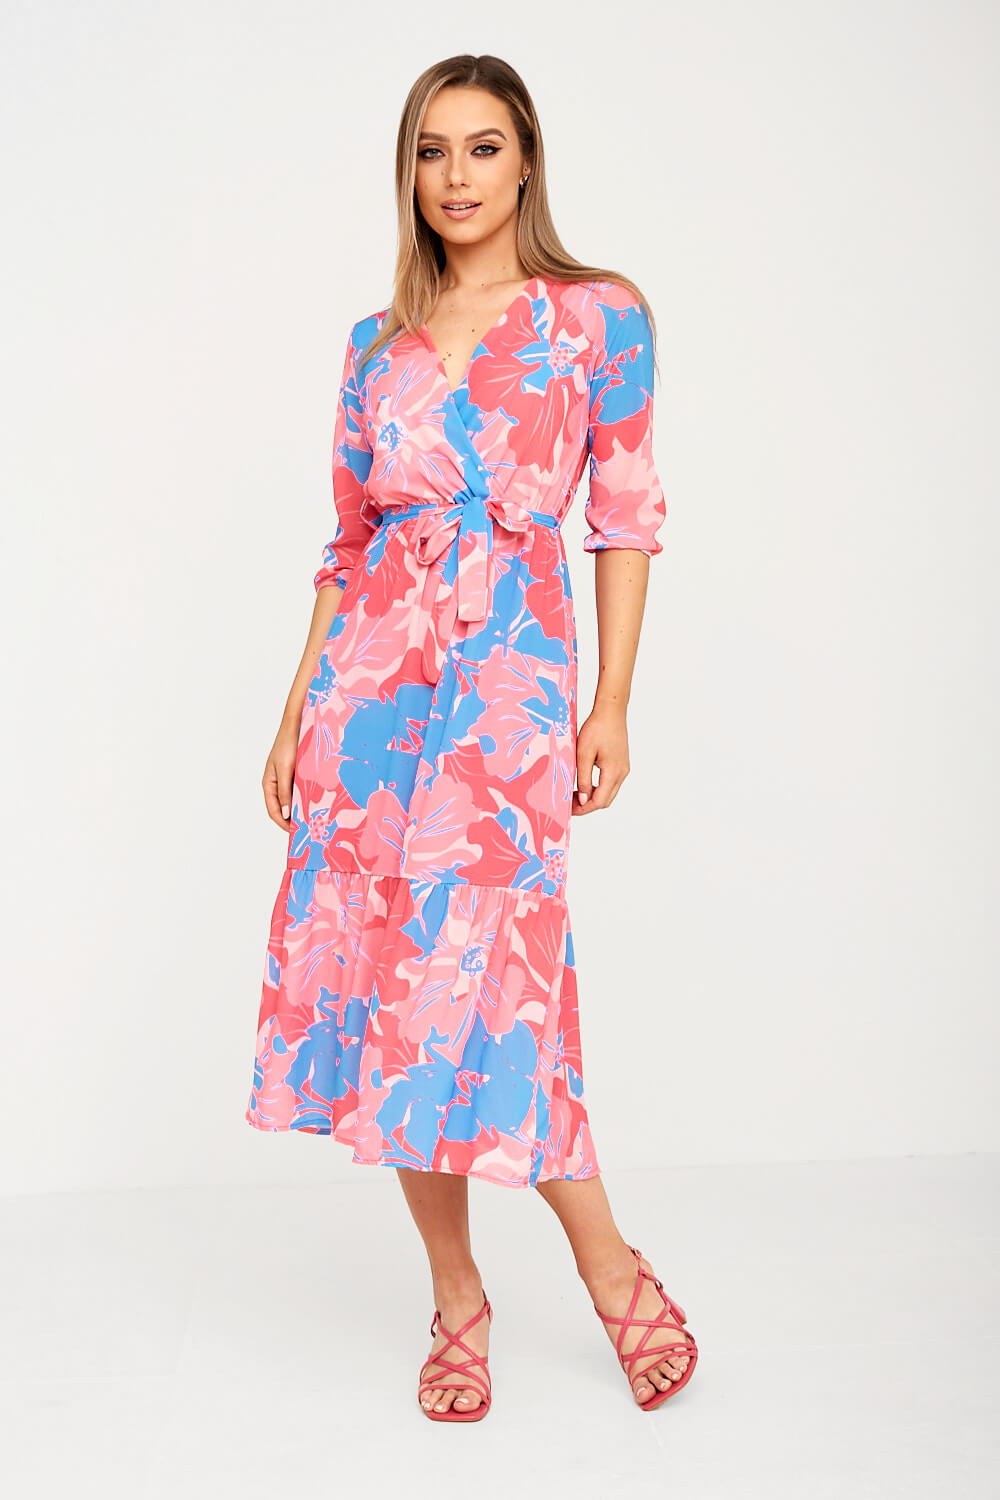 Kate and Pippa Boho Floral Midi Dress in Pink and Blue | iCLOTHING ...